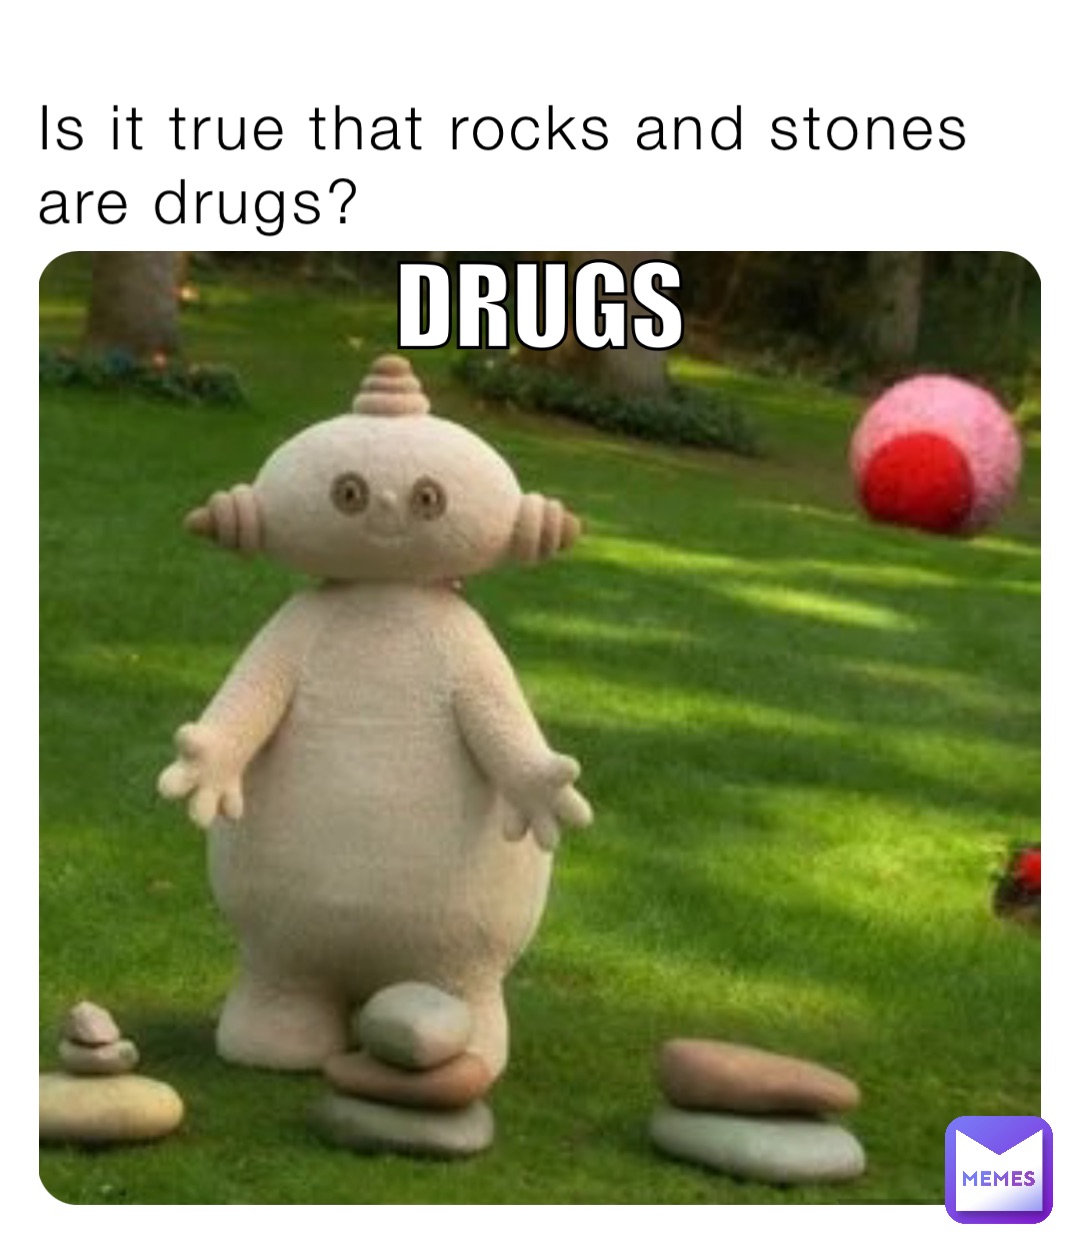 is-it-true-that-rocks-and-stones-are-drugs-9iezra3at2-memes